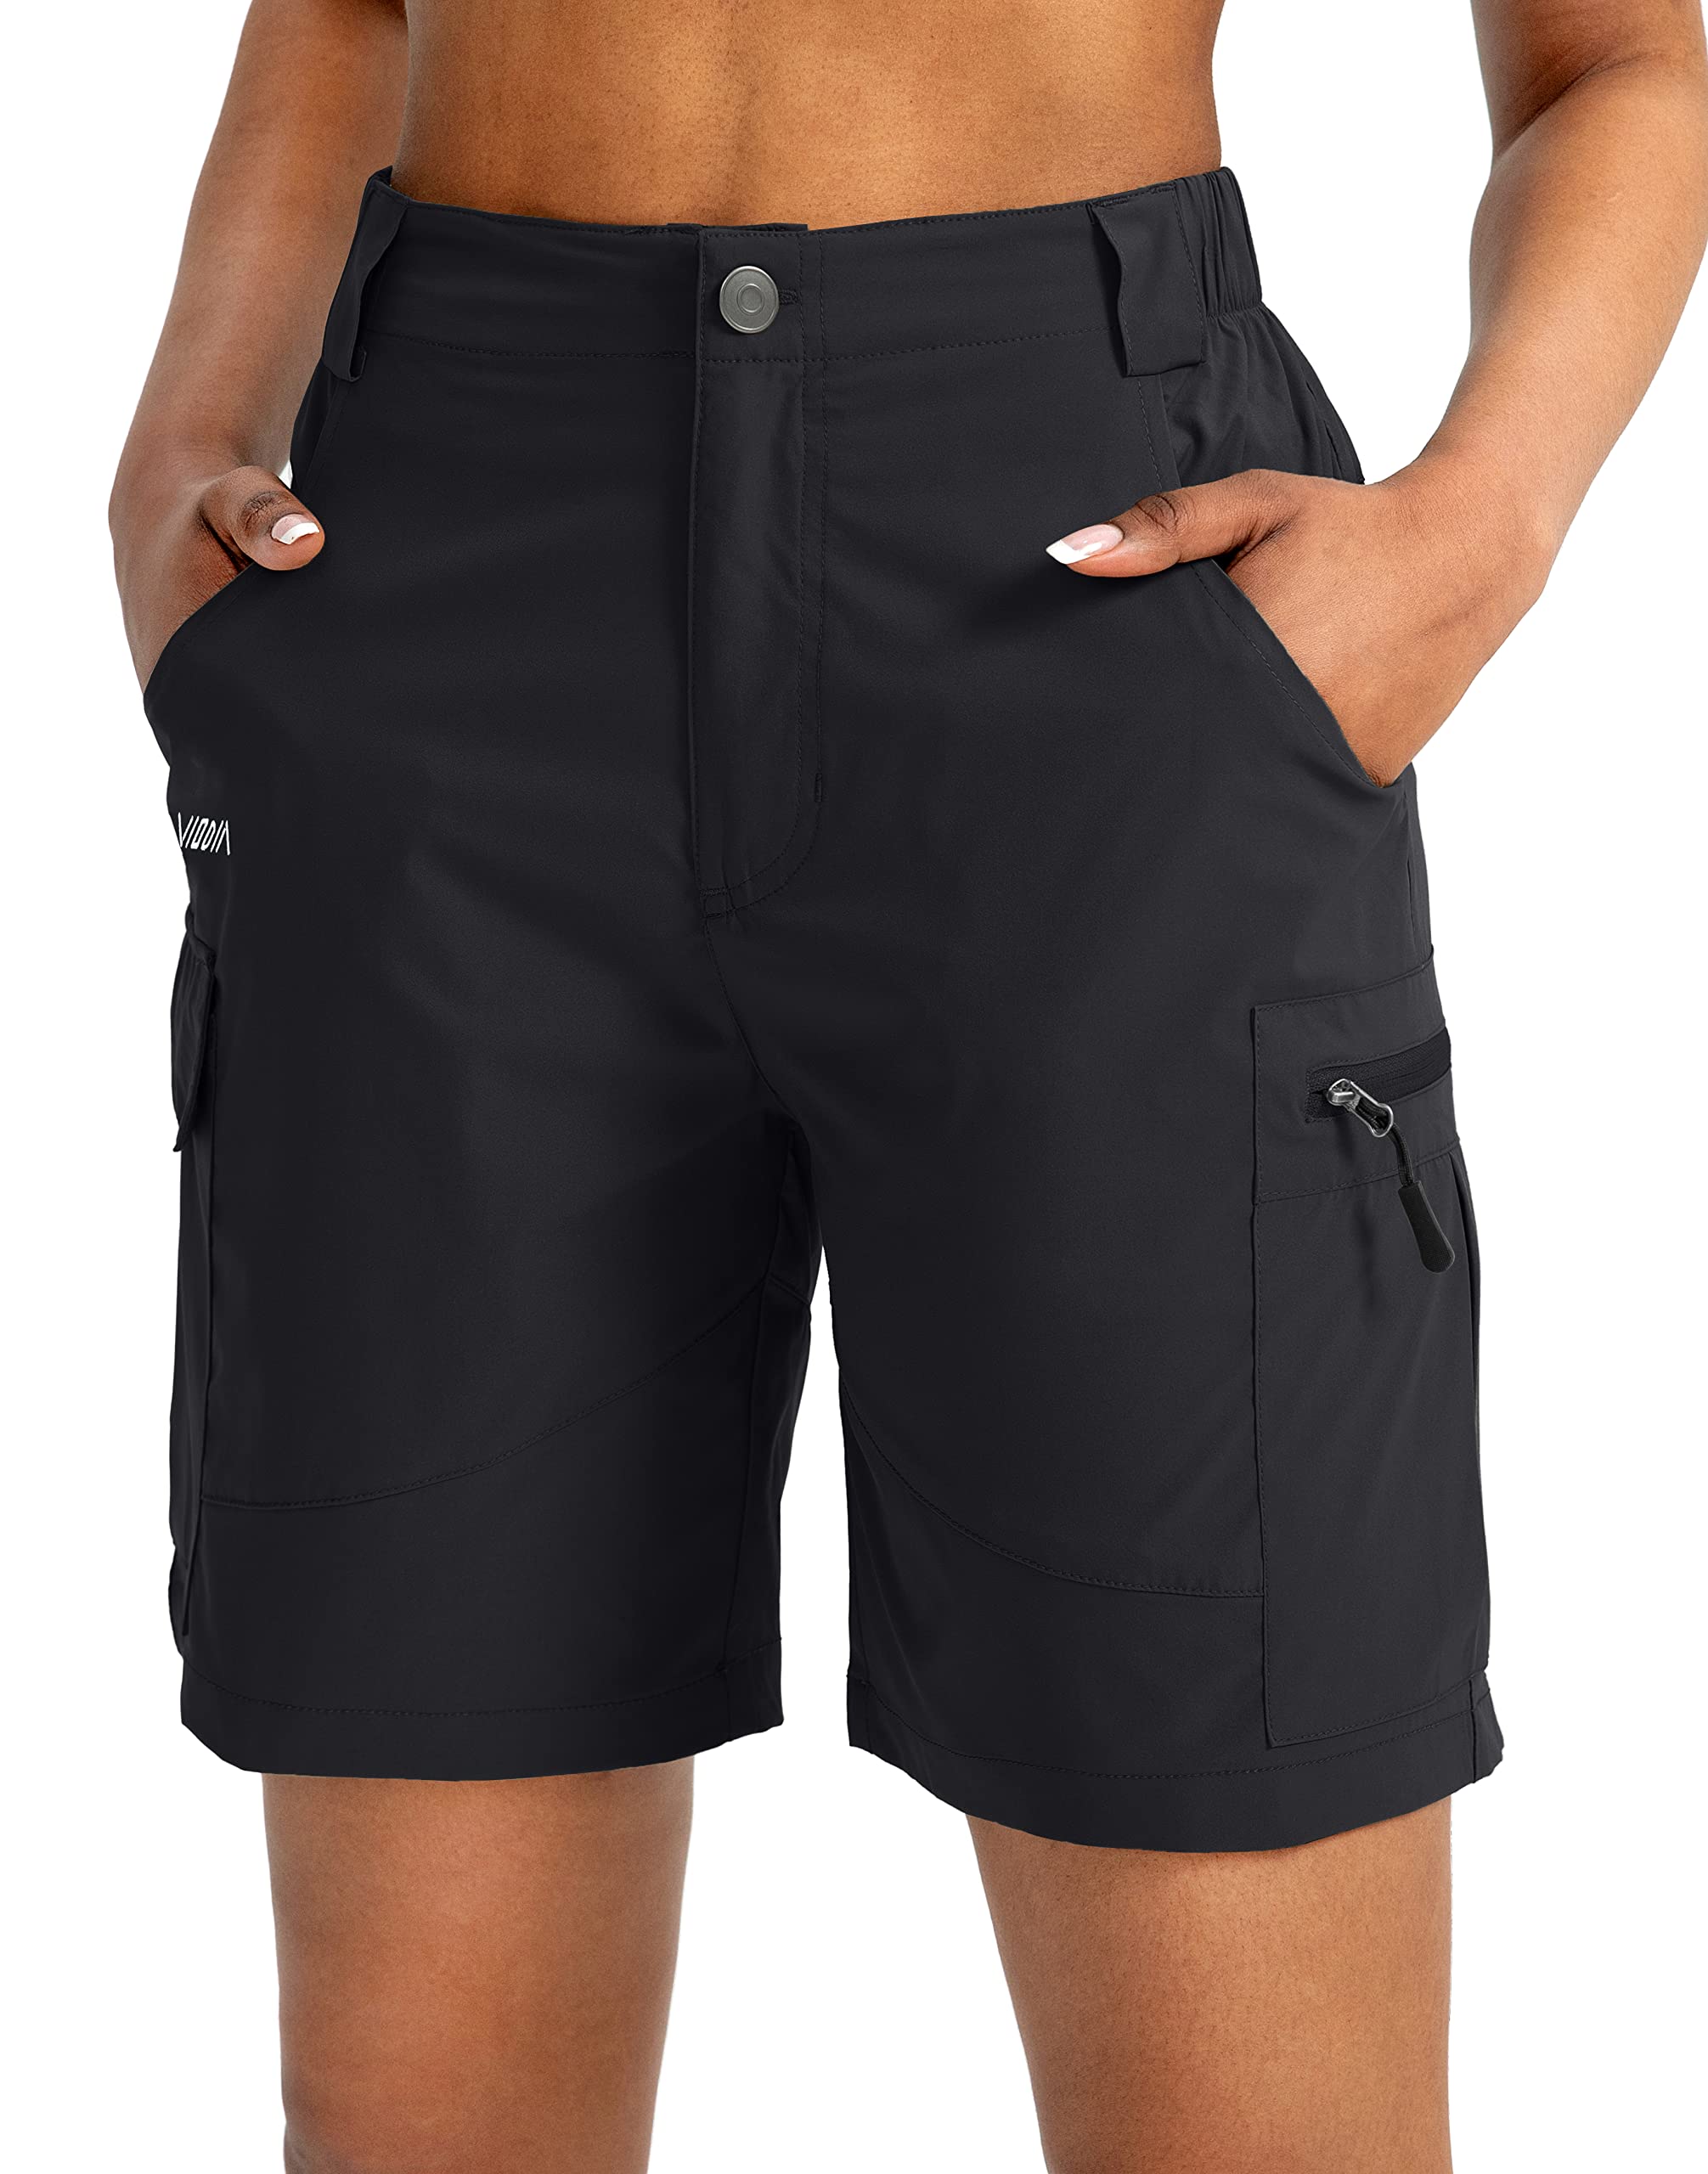 Viodia Women's 7 Hiking Cargo Shorts with Pockets Quick Dry Lightweight  Shorts for Women Golf Casual Summer Shorts Large Black